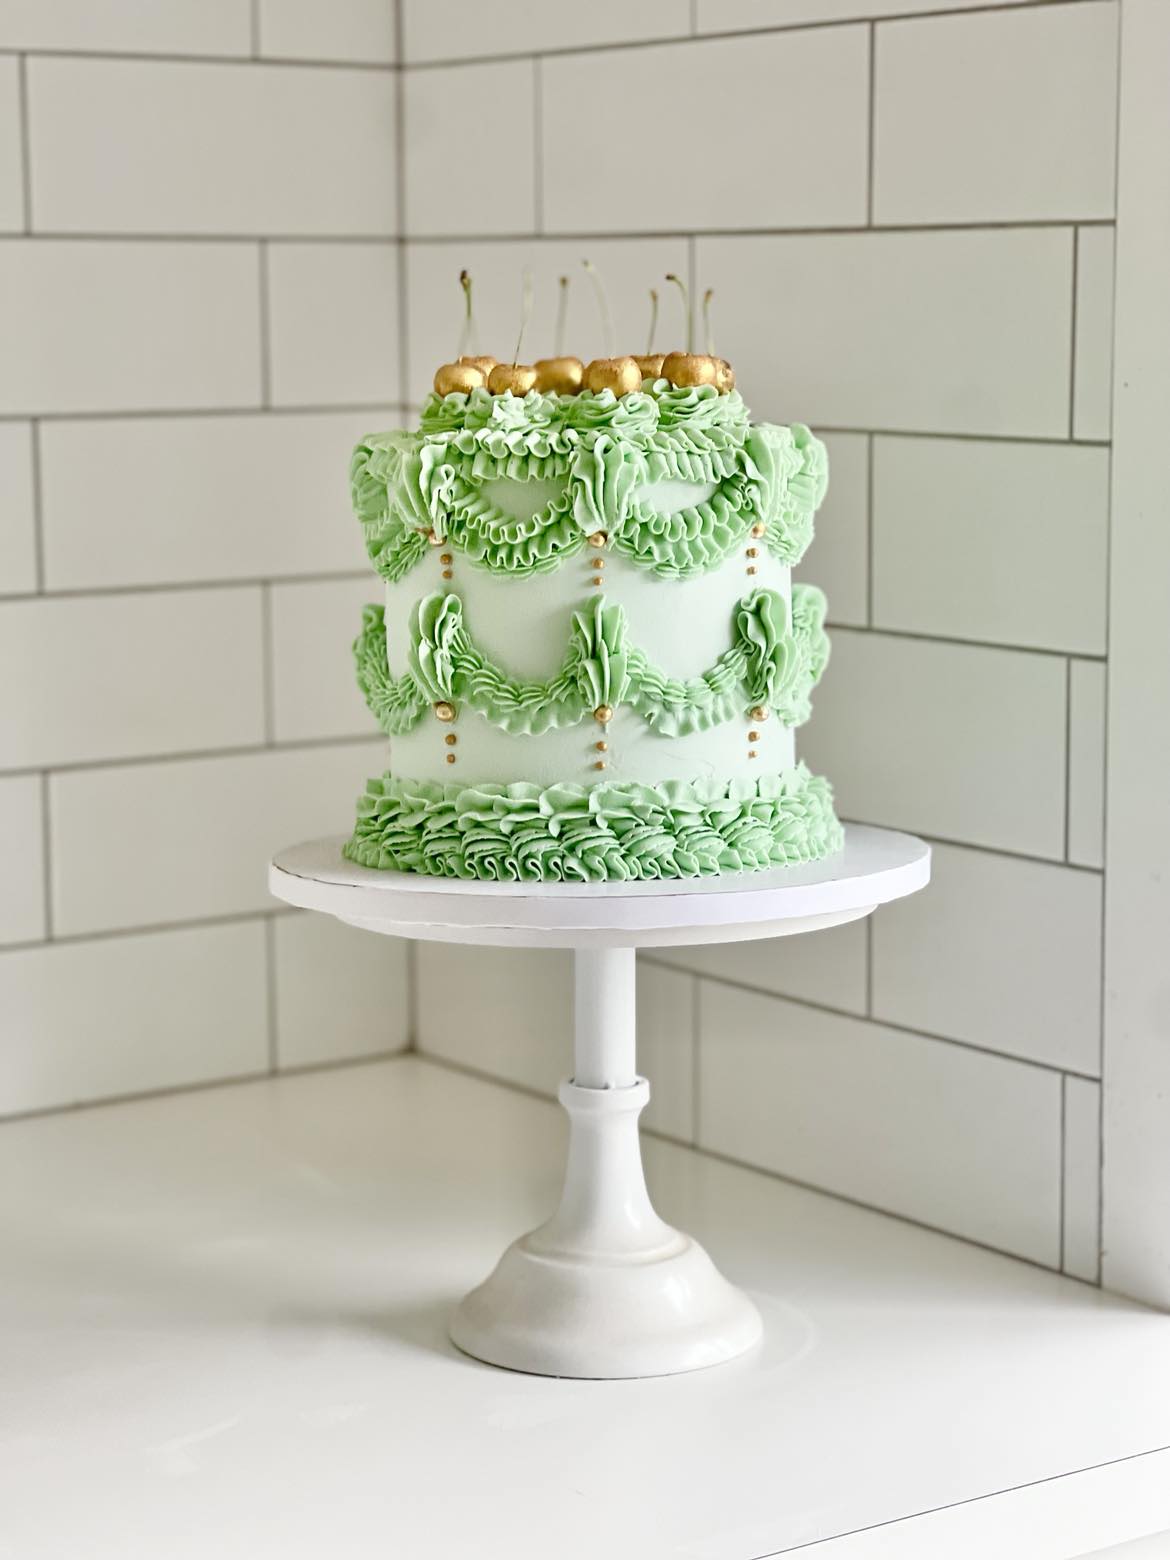 Vintage buttercream piping class - Saturday June 15th, 12:30-2:30pm